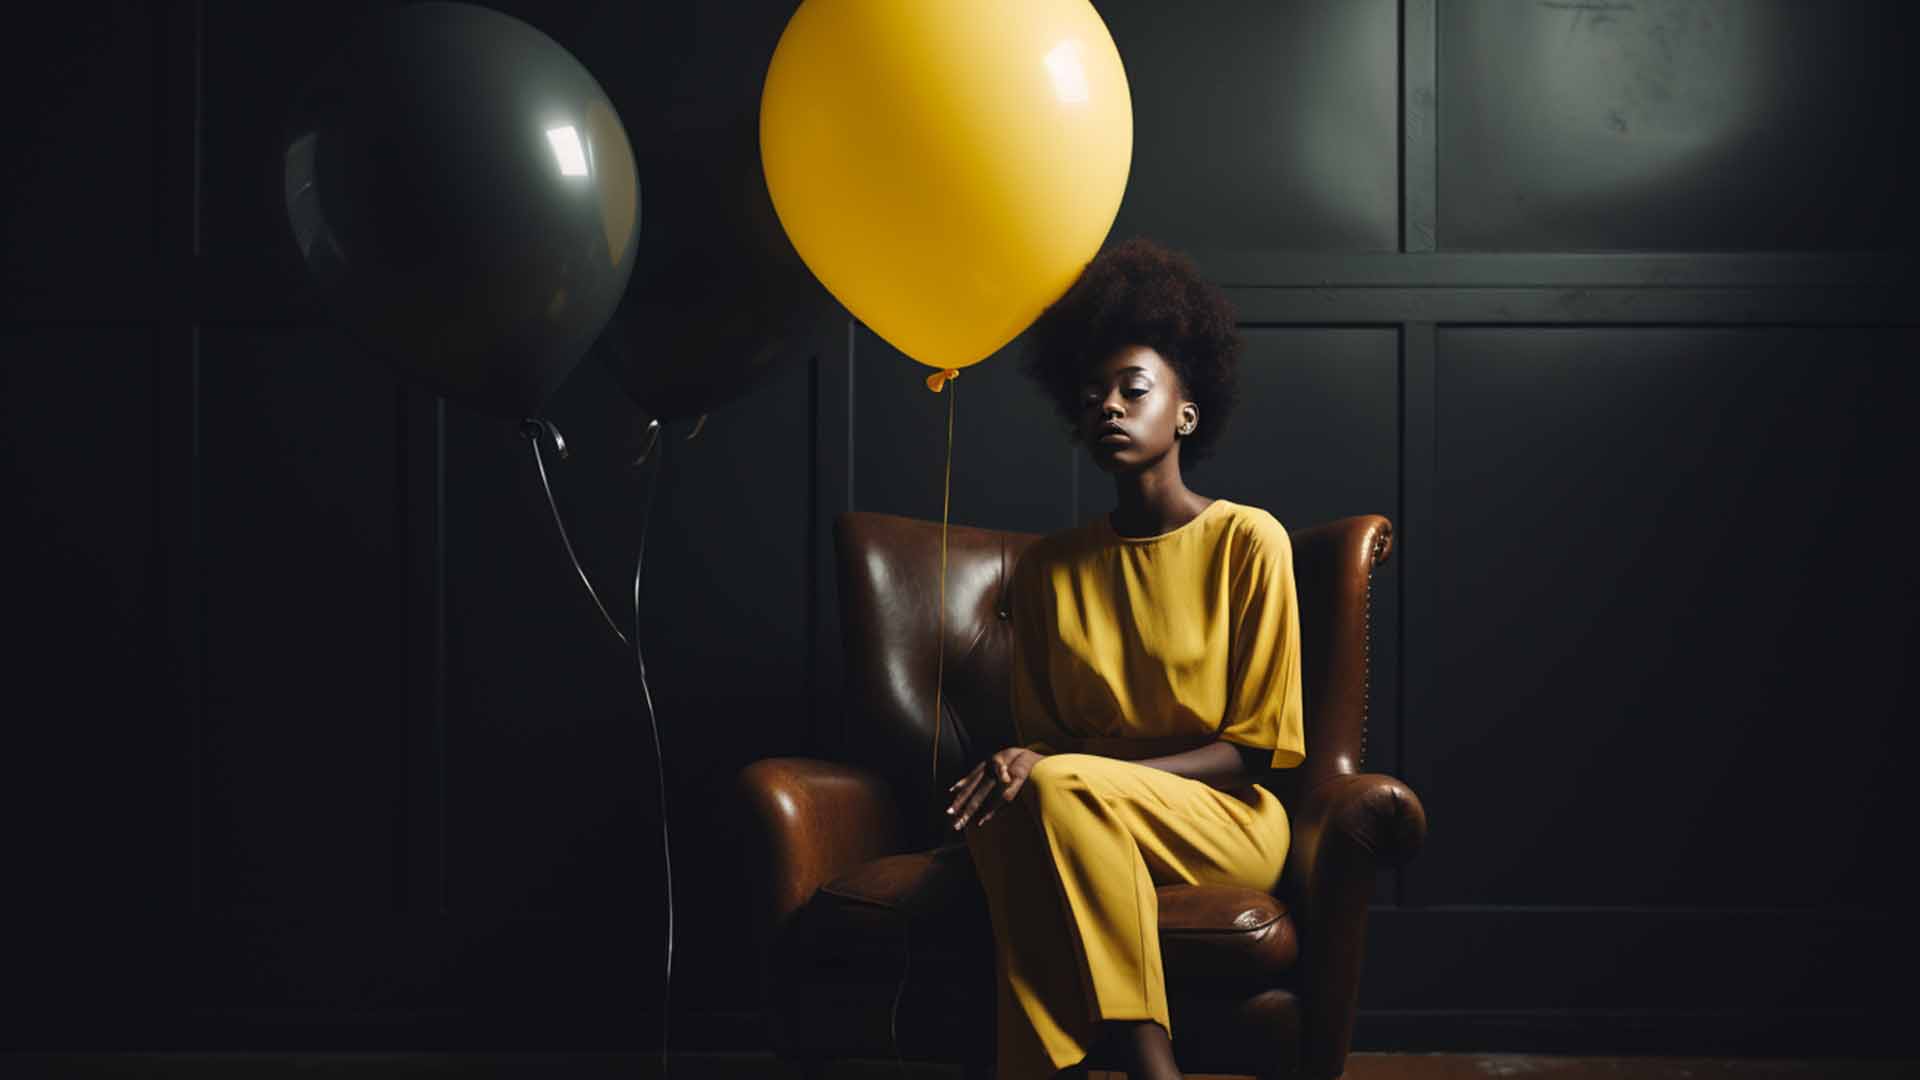 untitled 1 0084 yana heinstein a girl with a yellow chair and balloon on it in df5e0850 eef0 4123 a605 0e15e5307a1d